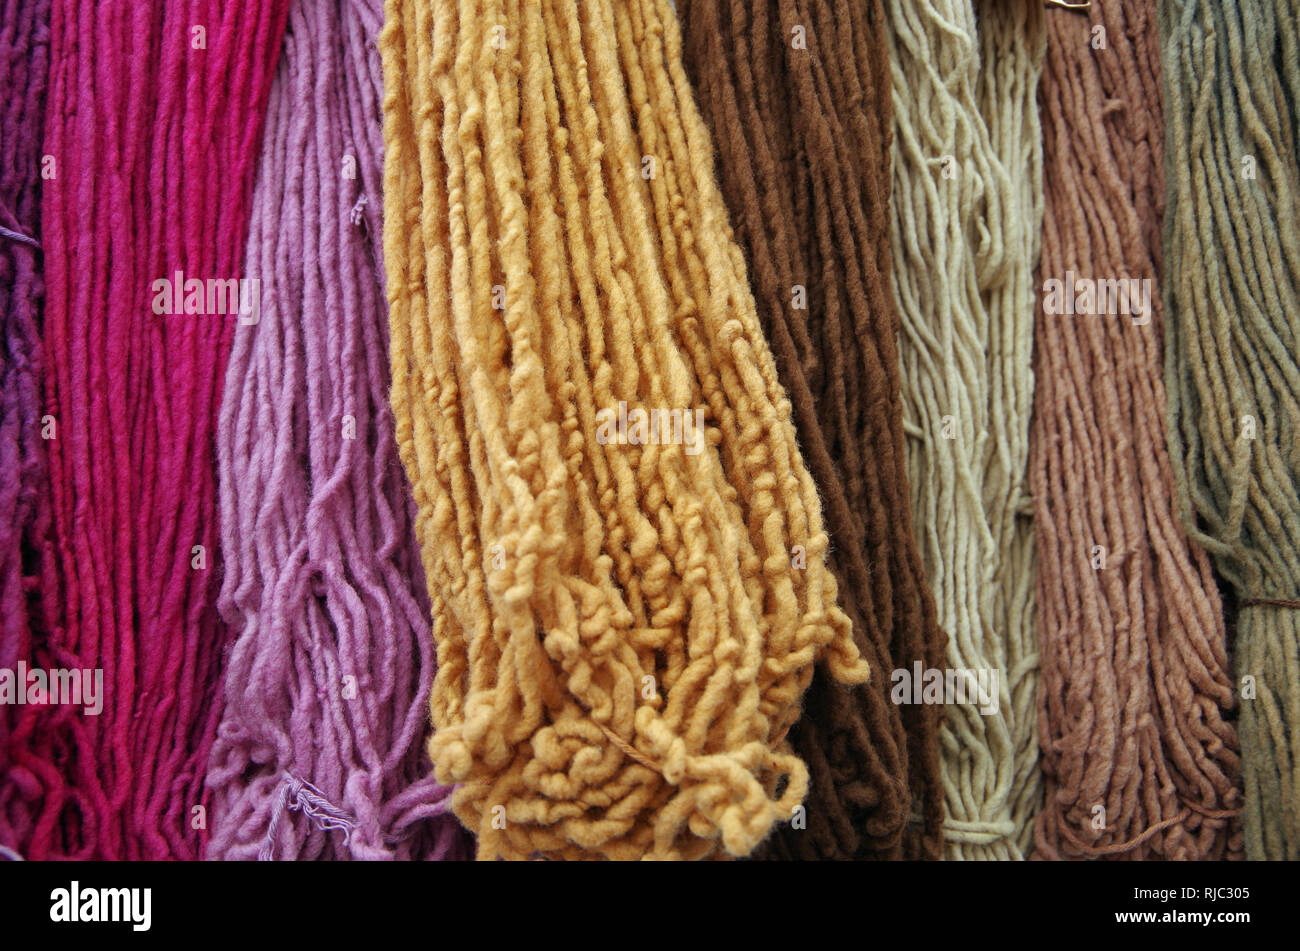 Merino wool colorful dyed textile long hanging strands Stock Photo